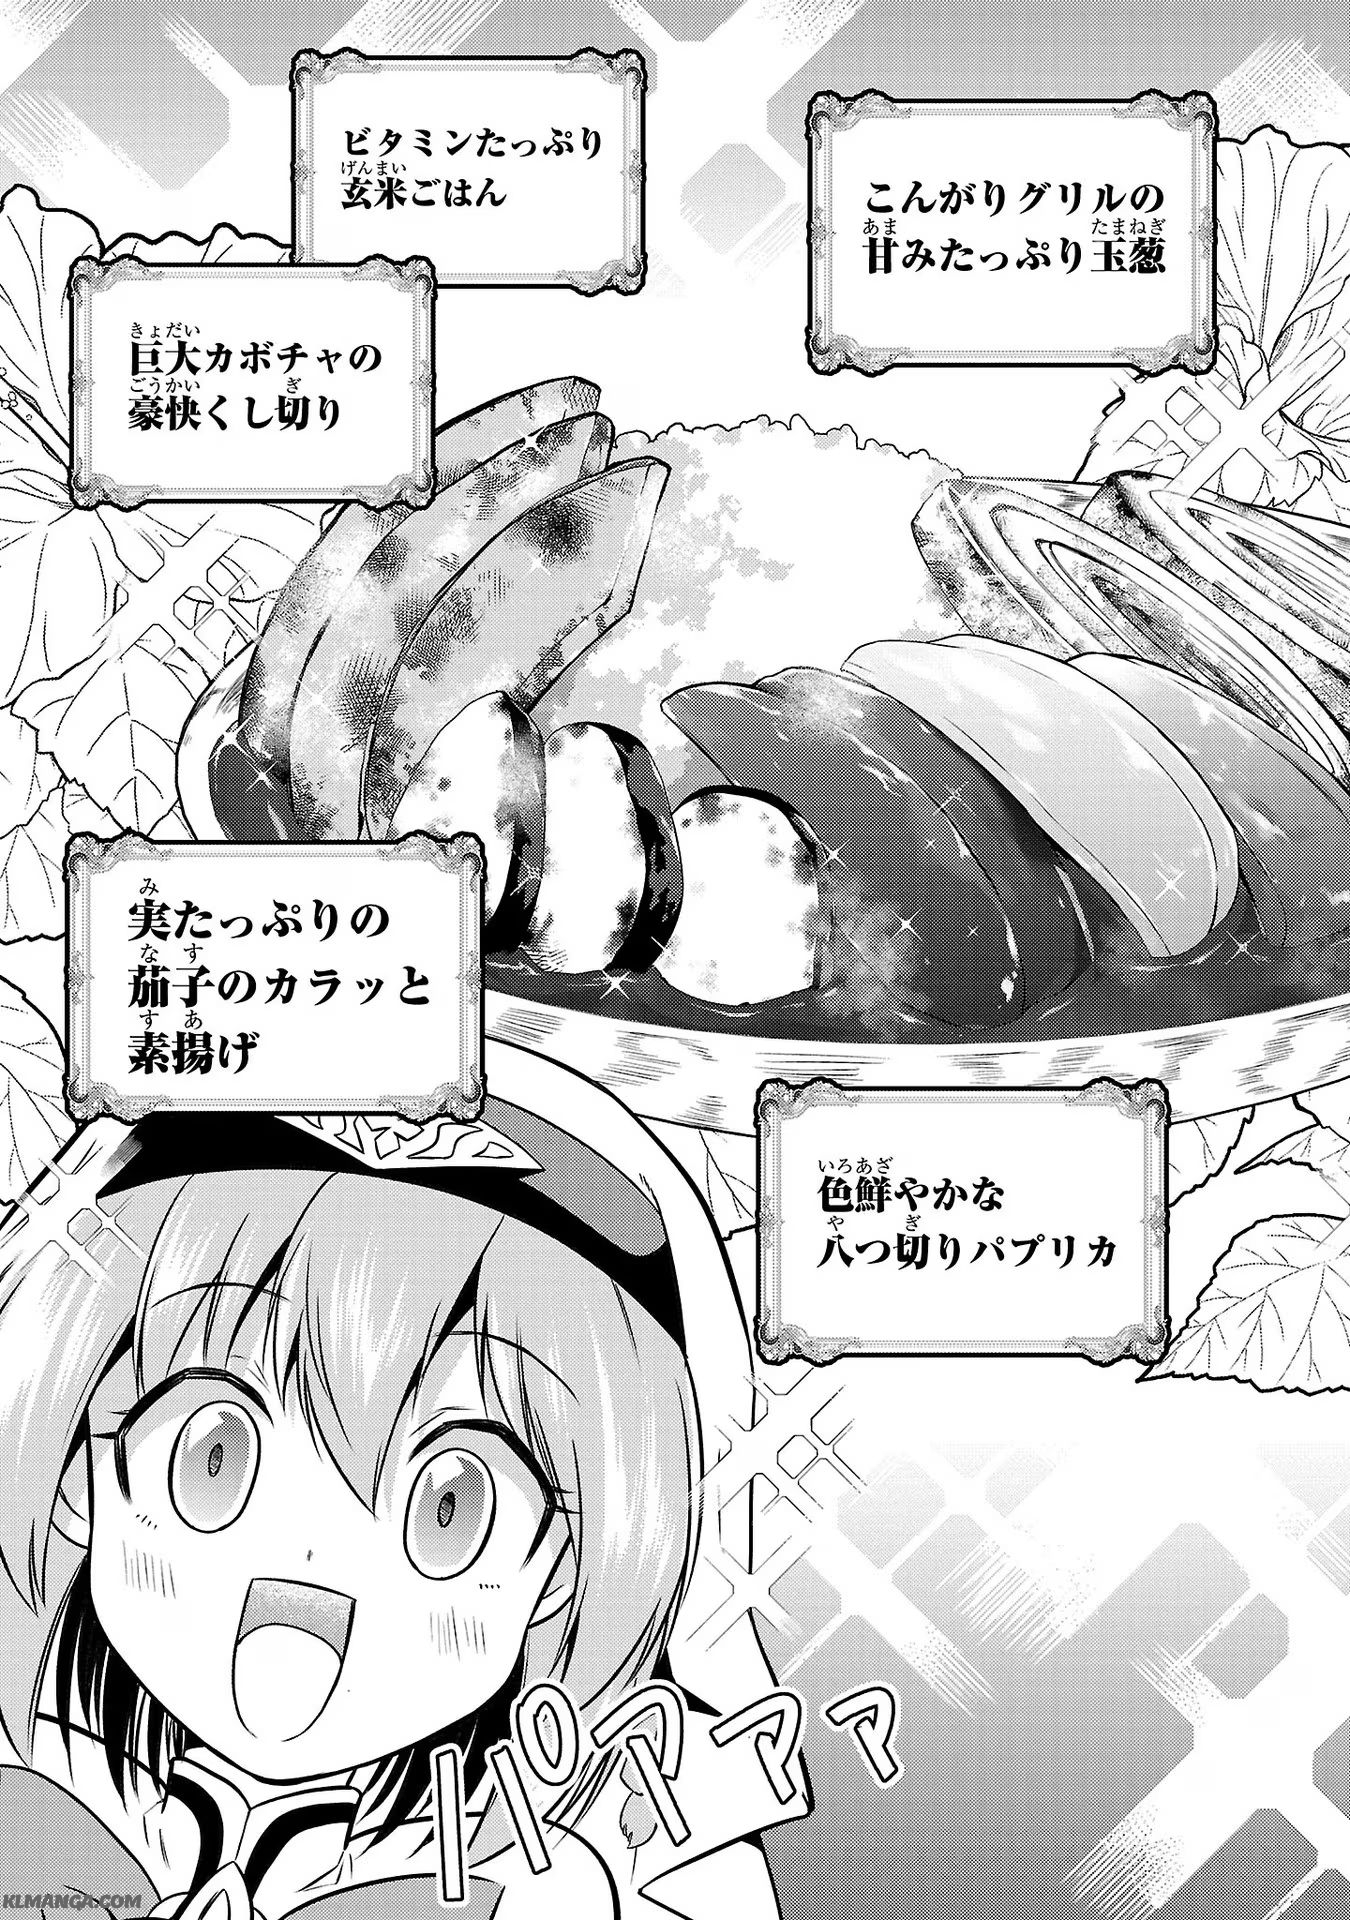 Hungry Saint and Full-Stomach Witch’s Slow Life in Another World! 腹ペコ聖女とまんぷく魔女の異世界スローライフ! 第13話 - Page 3